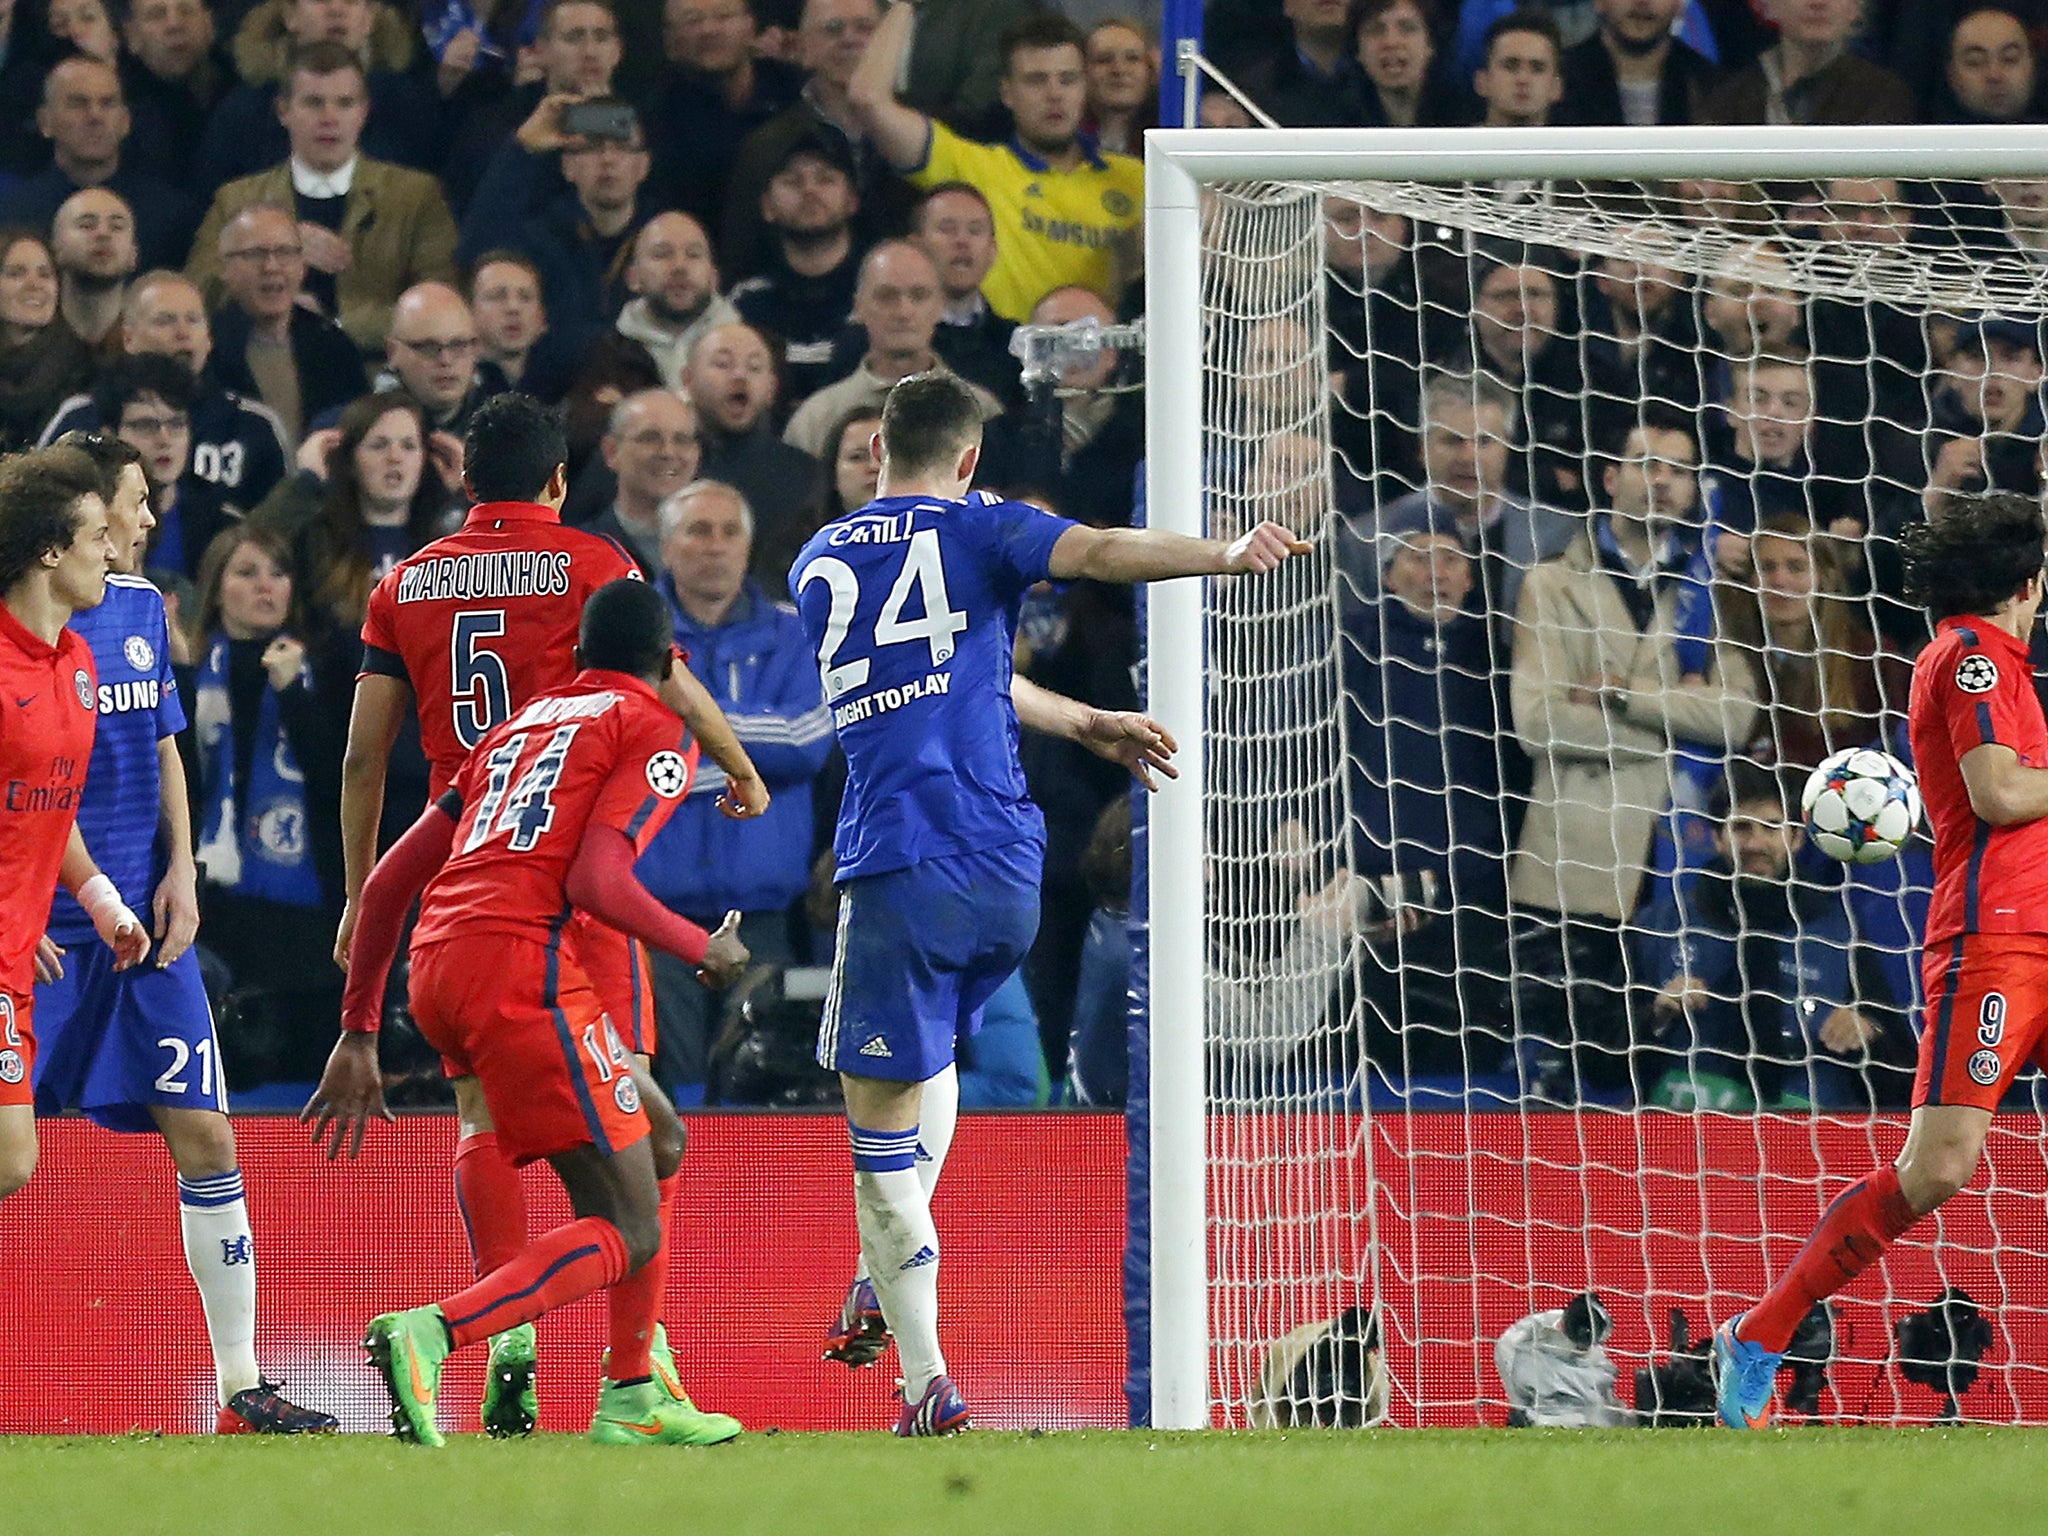 Gary Cahill puts Chelsea in front